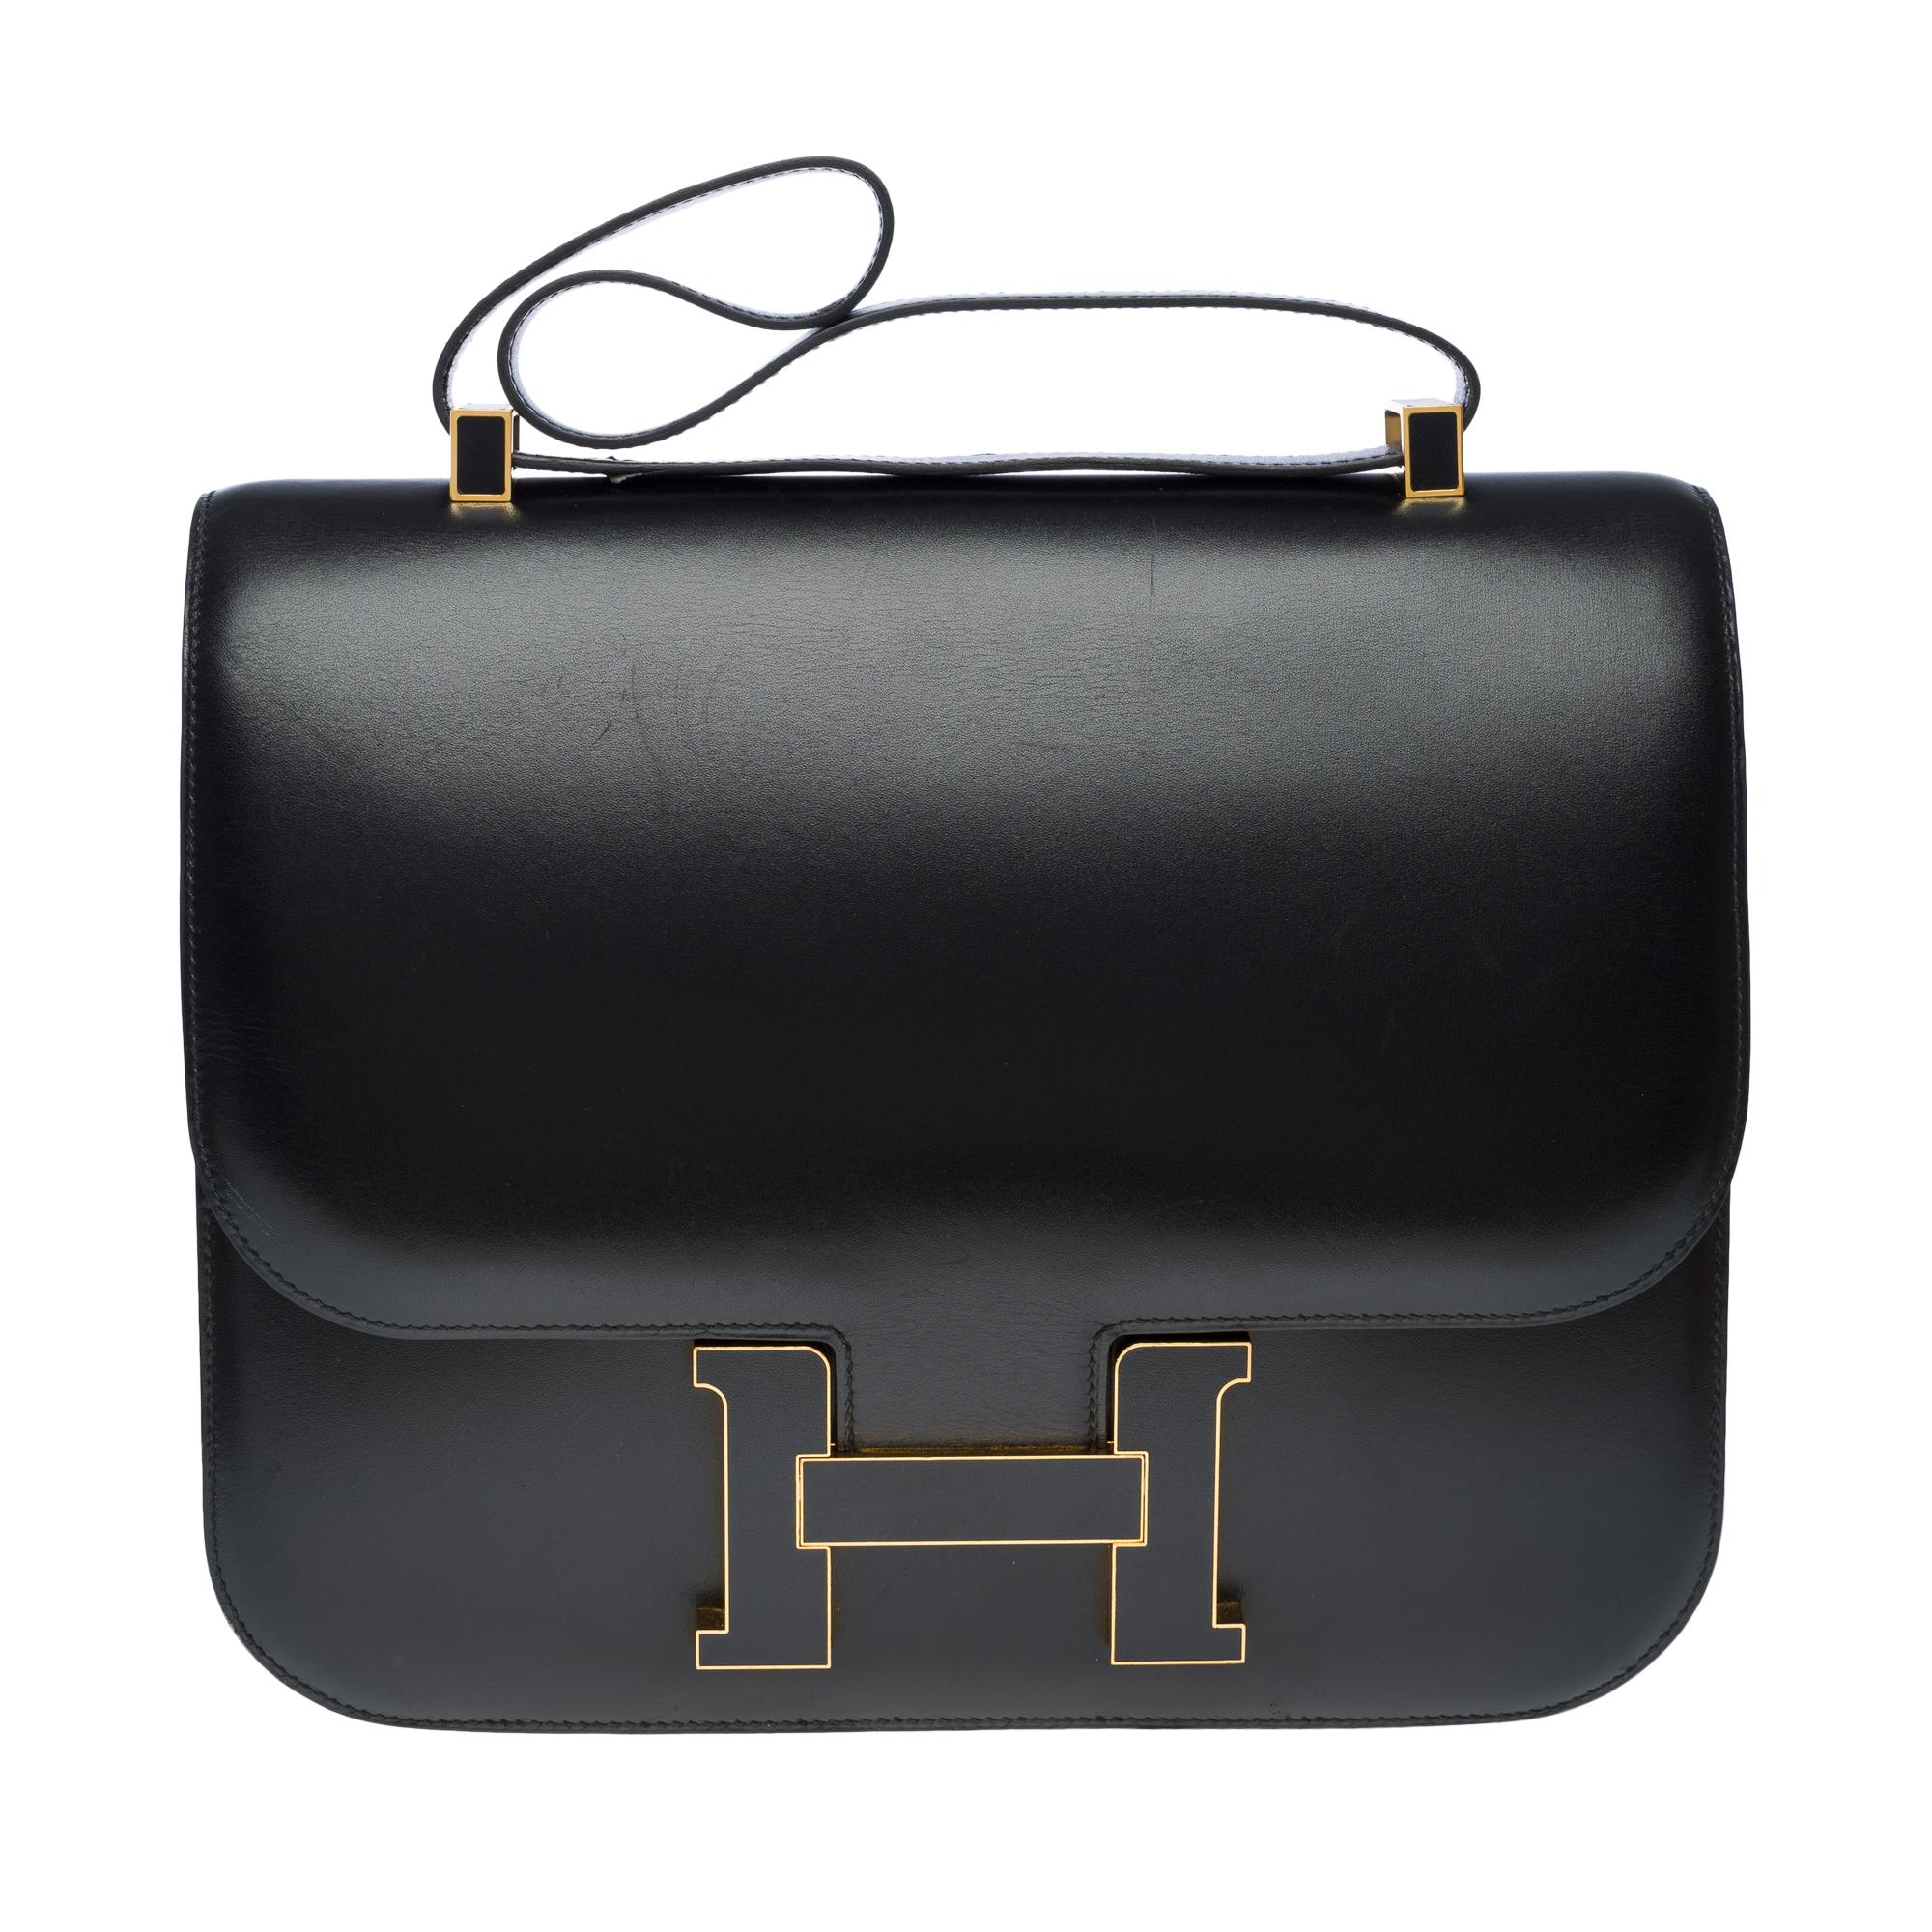  Rare Hermès Constance Cartable shoulder bag in Black Box Calf leather , GHW In Excellent Condition For Sale In Paris, IDF